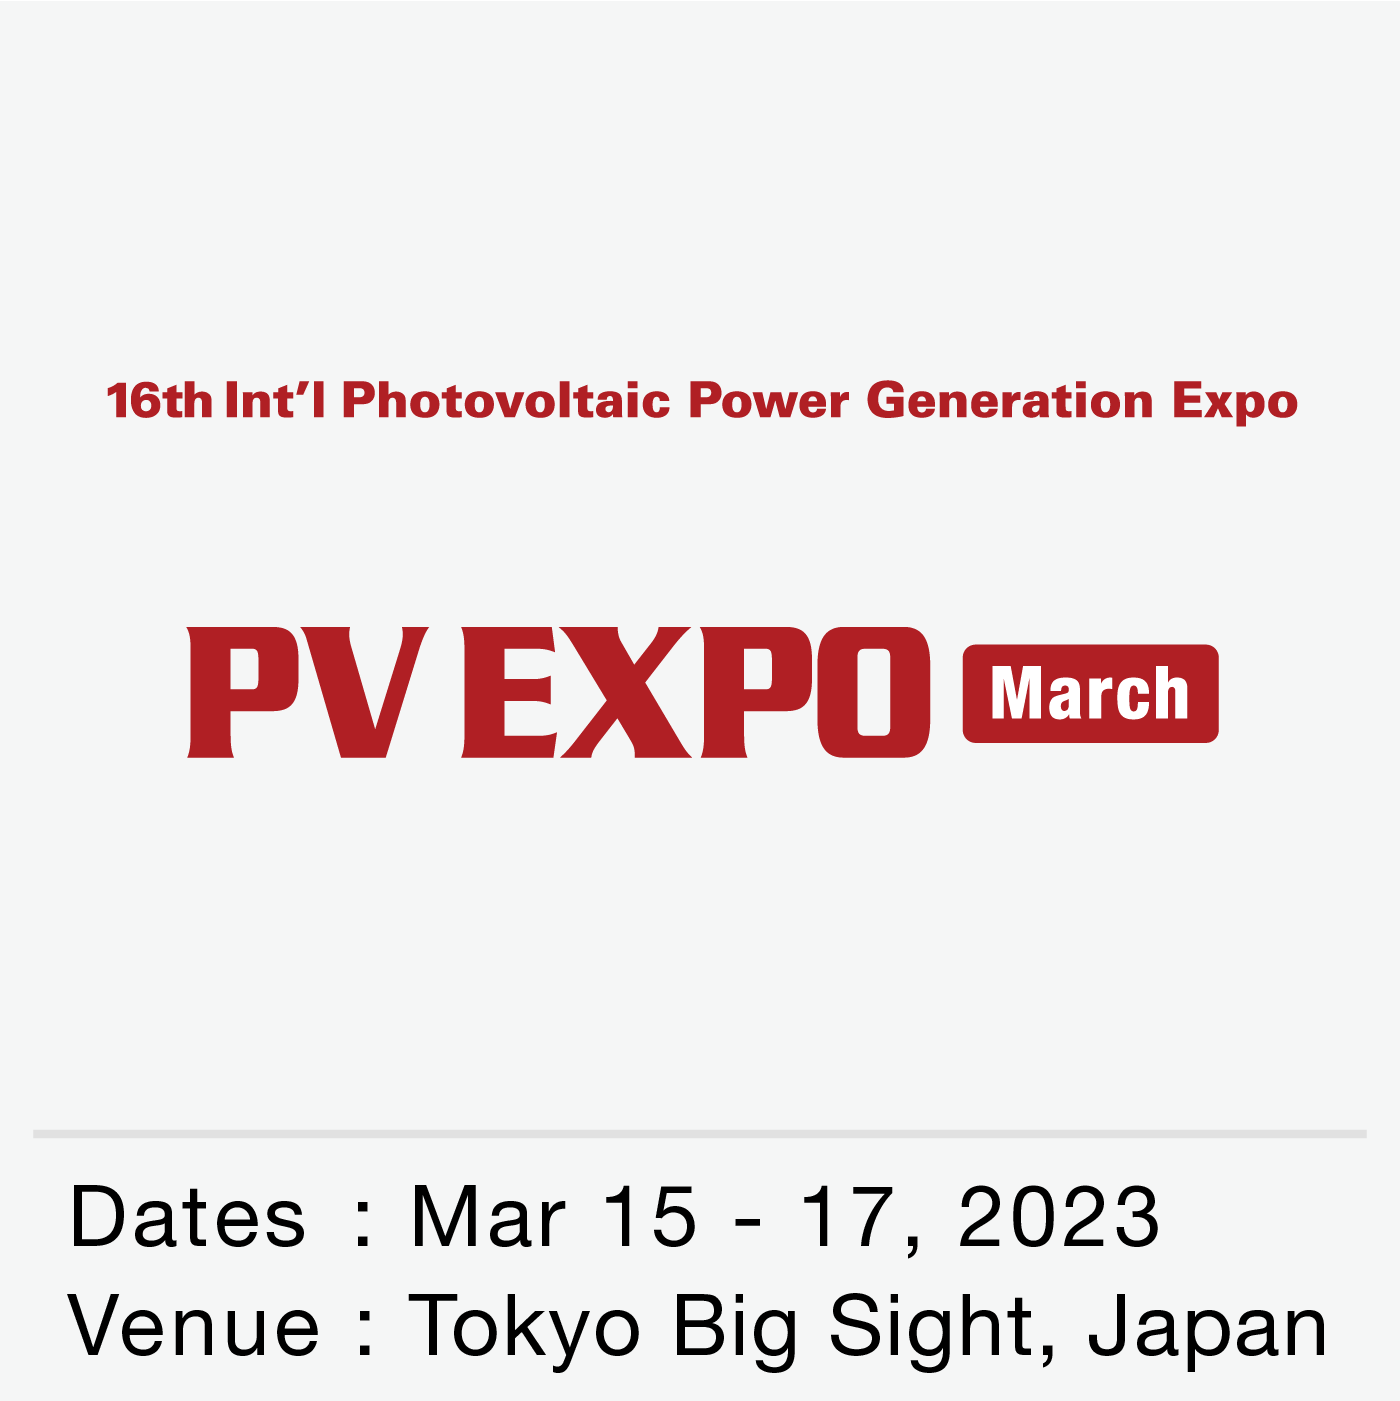 PV EXPO [March]